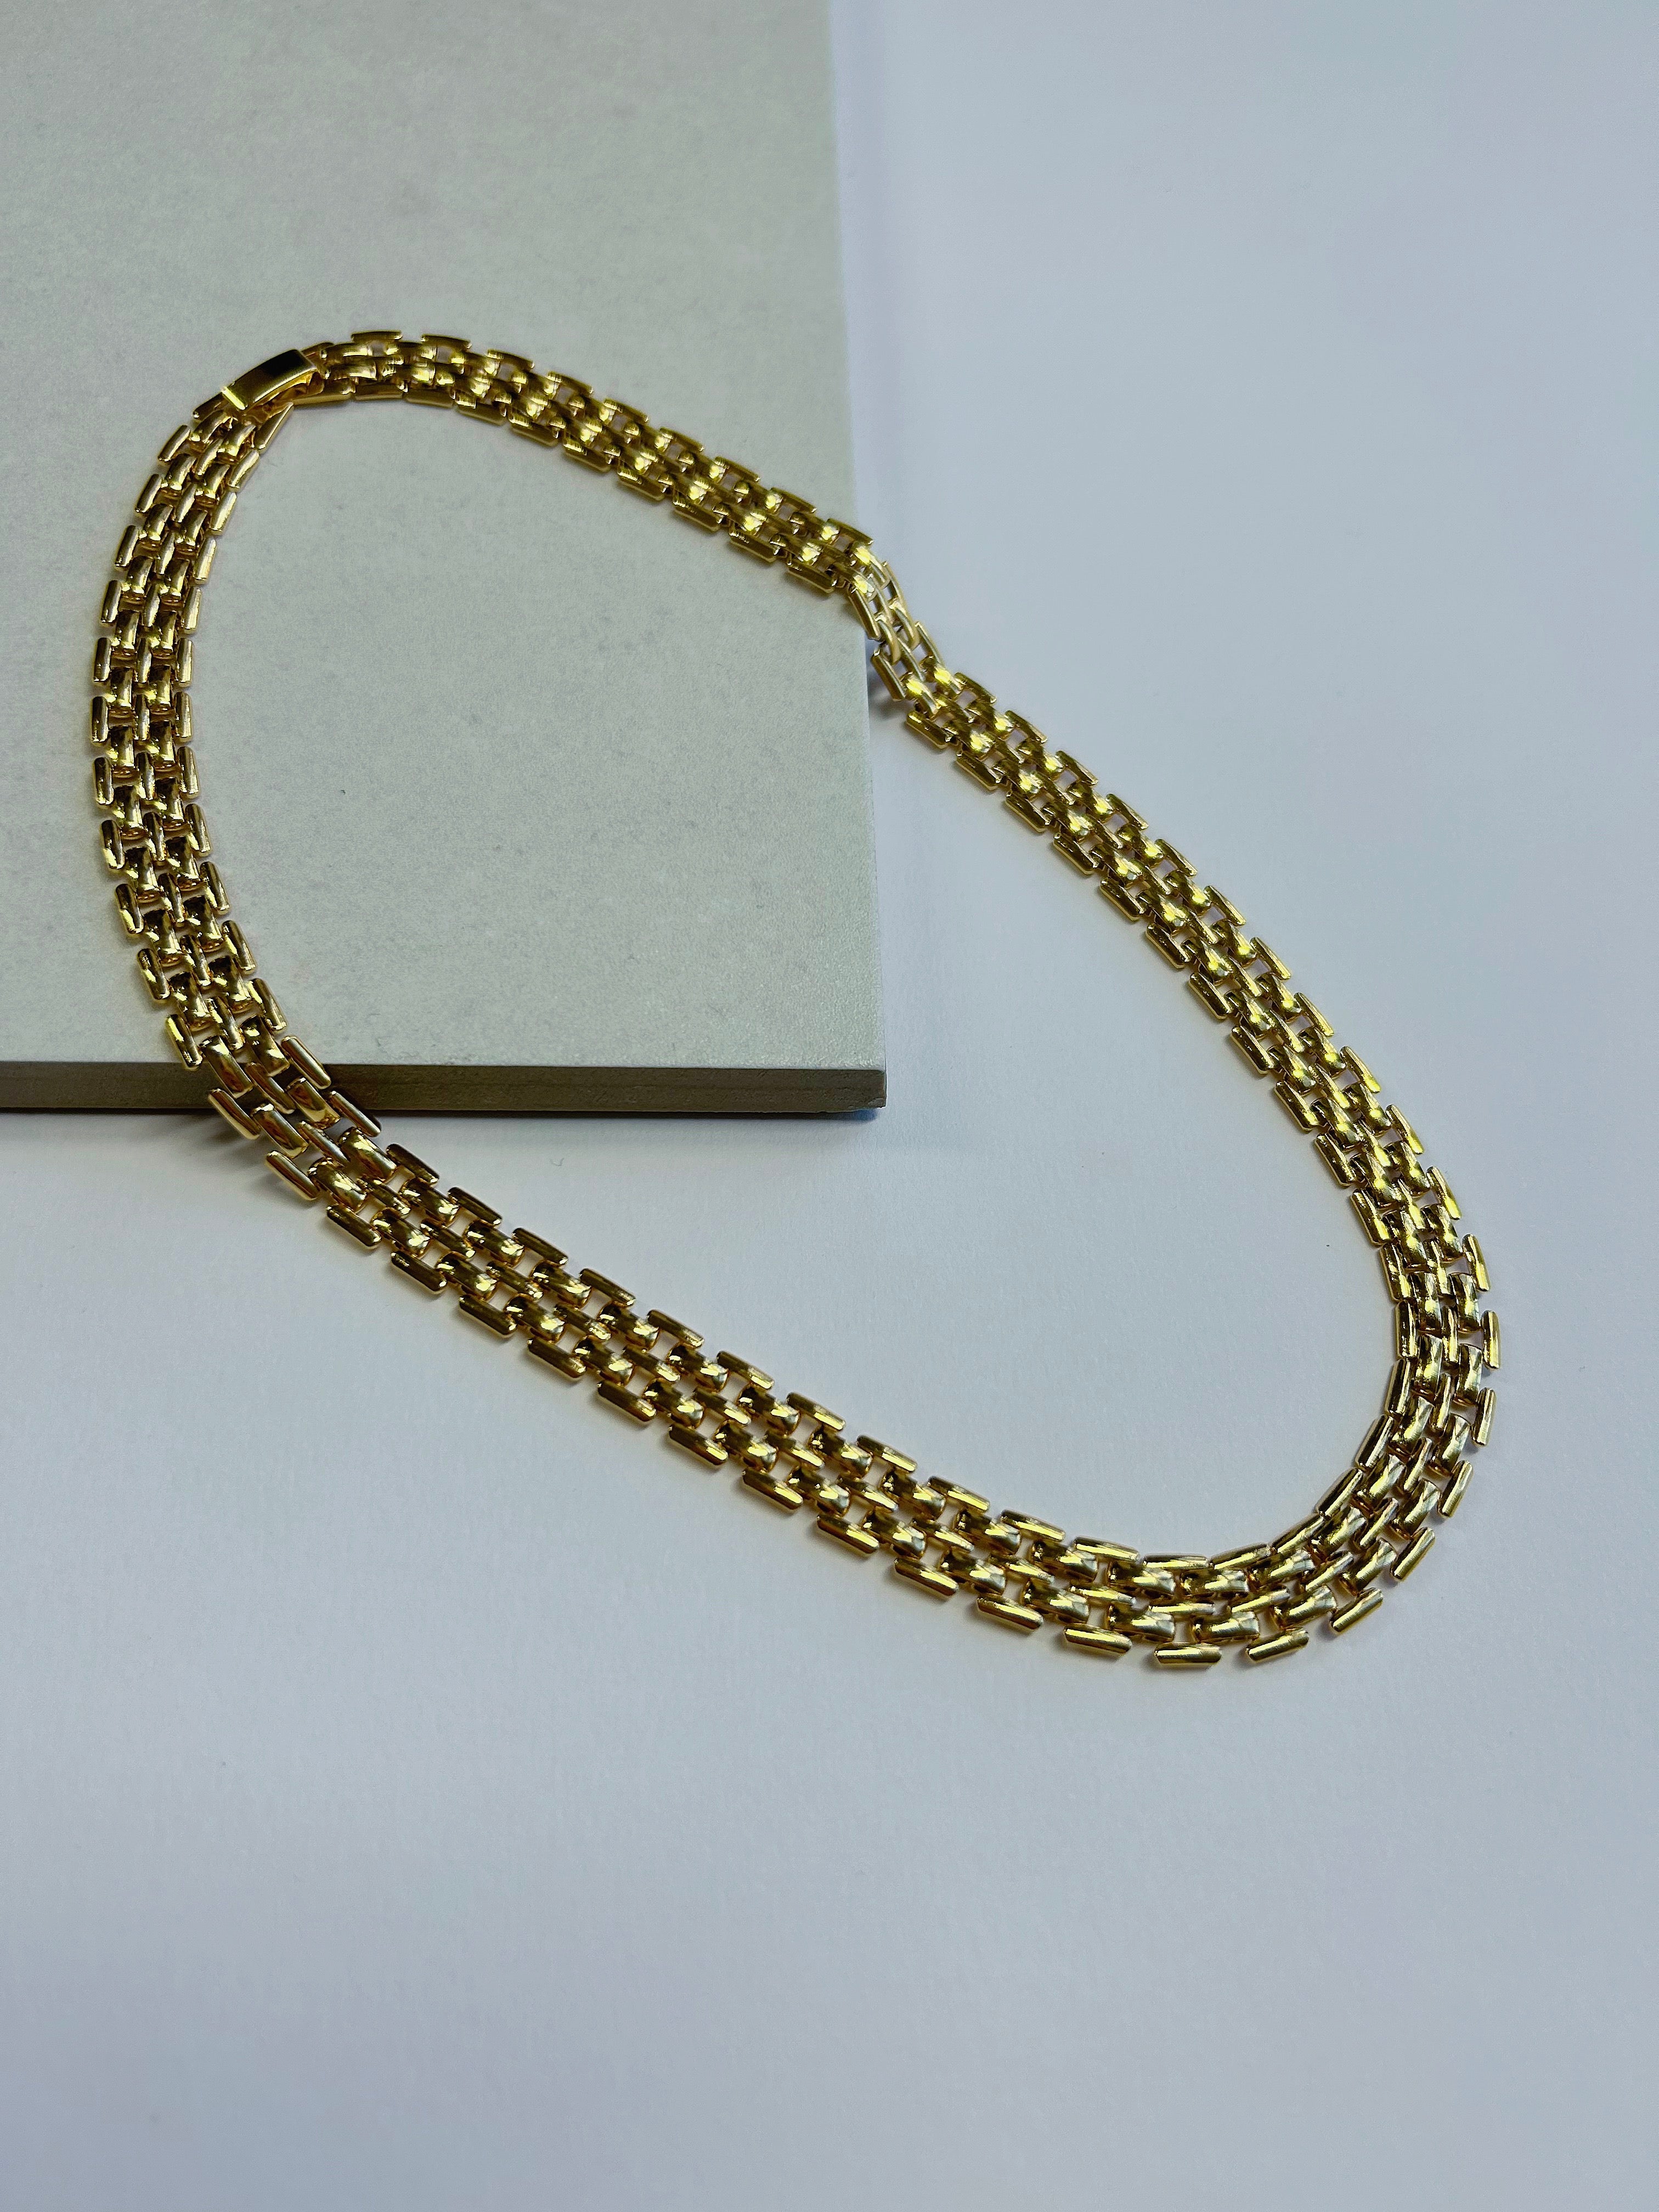 Gold Plated Panther Link Necklace - 15.5"